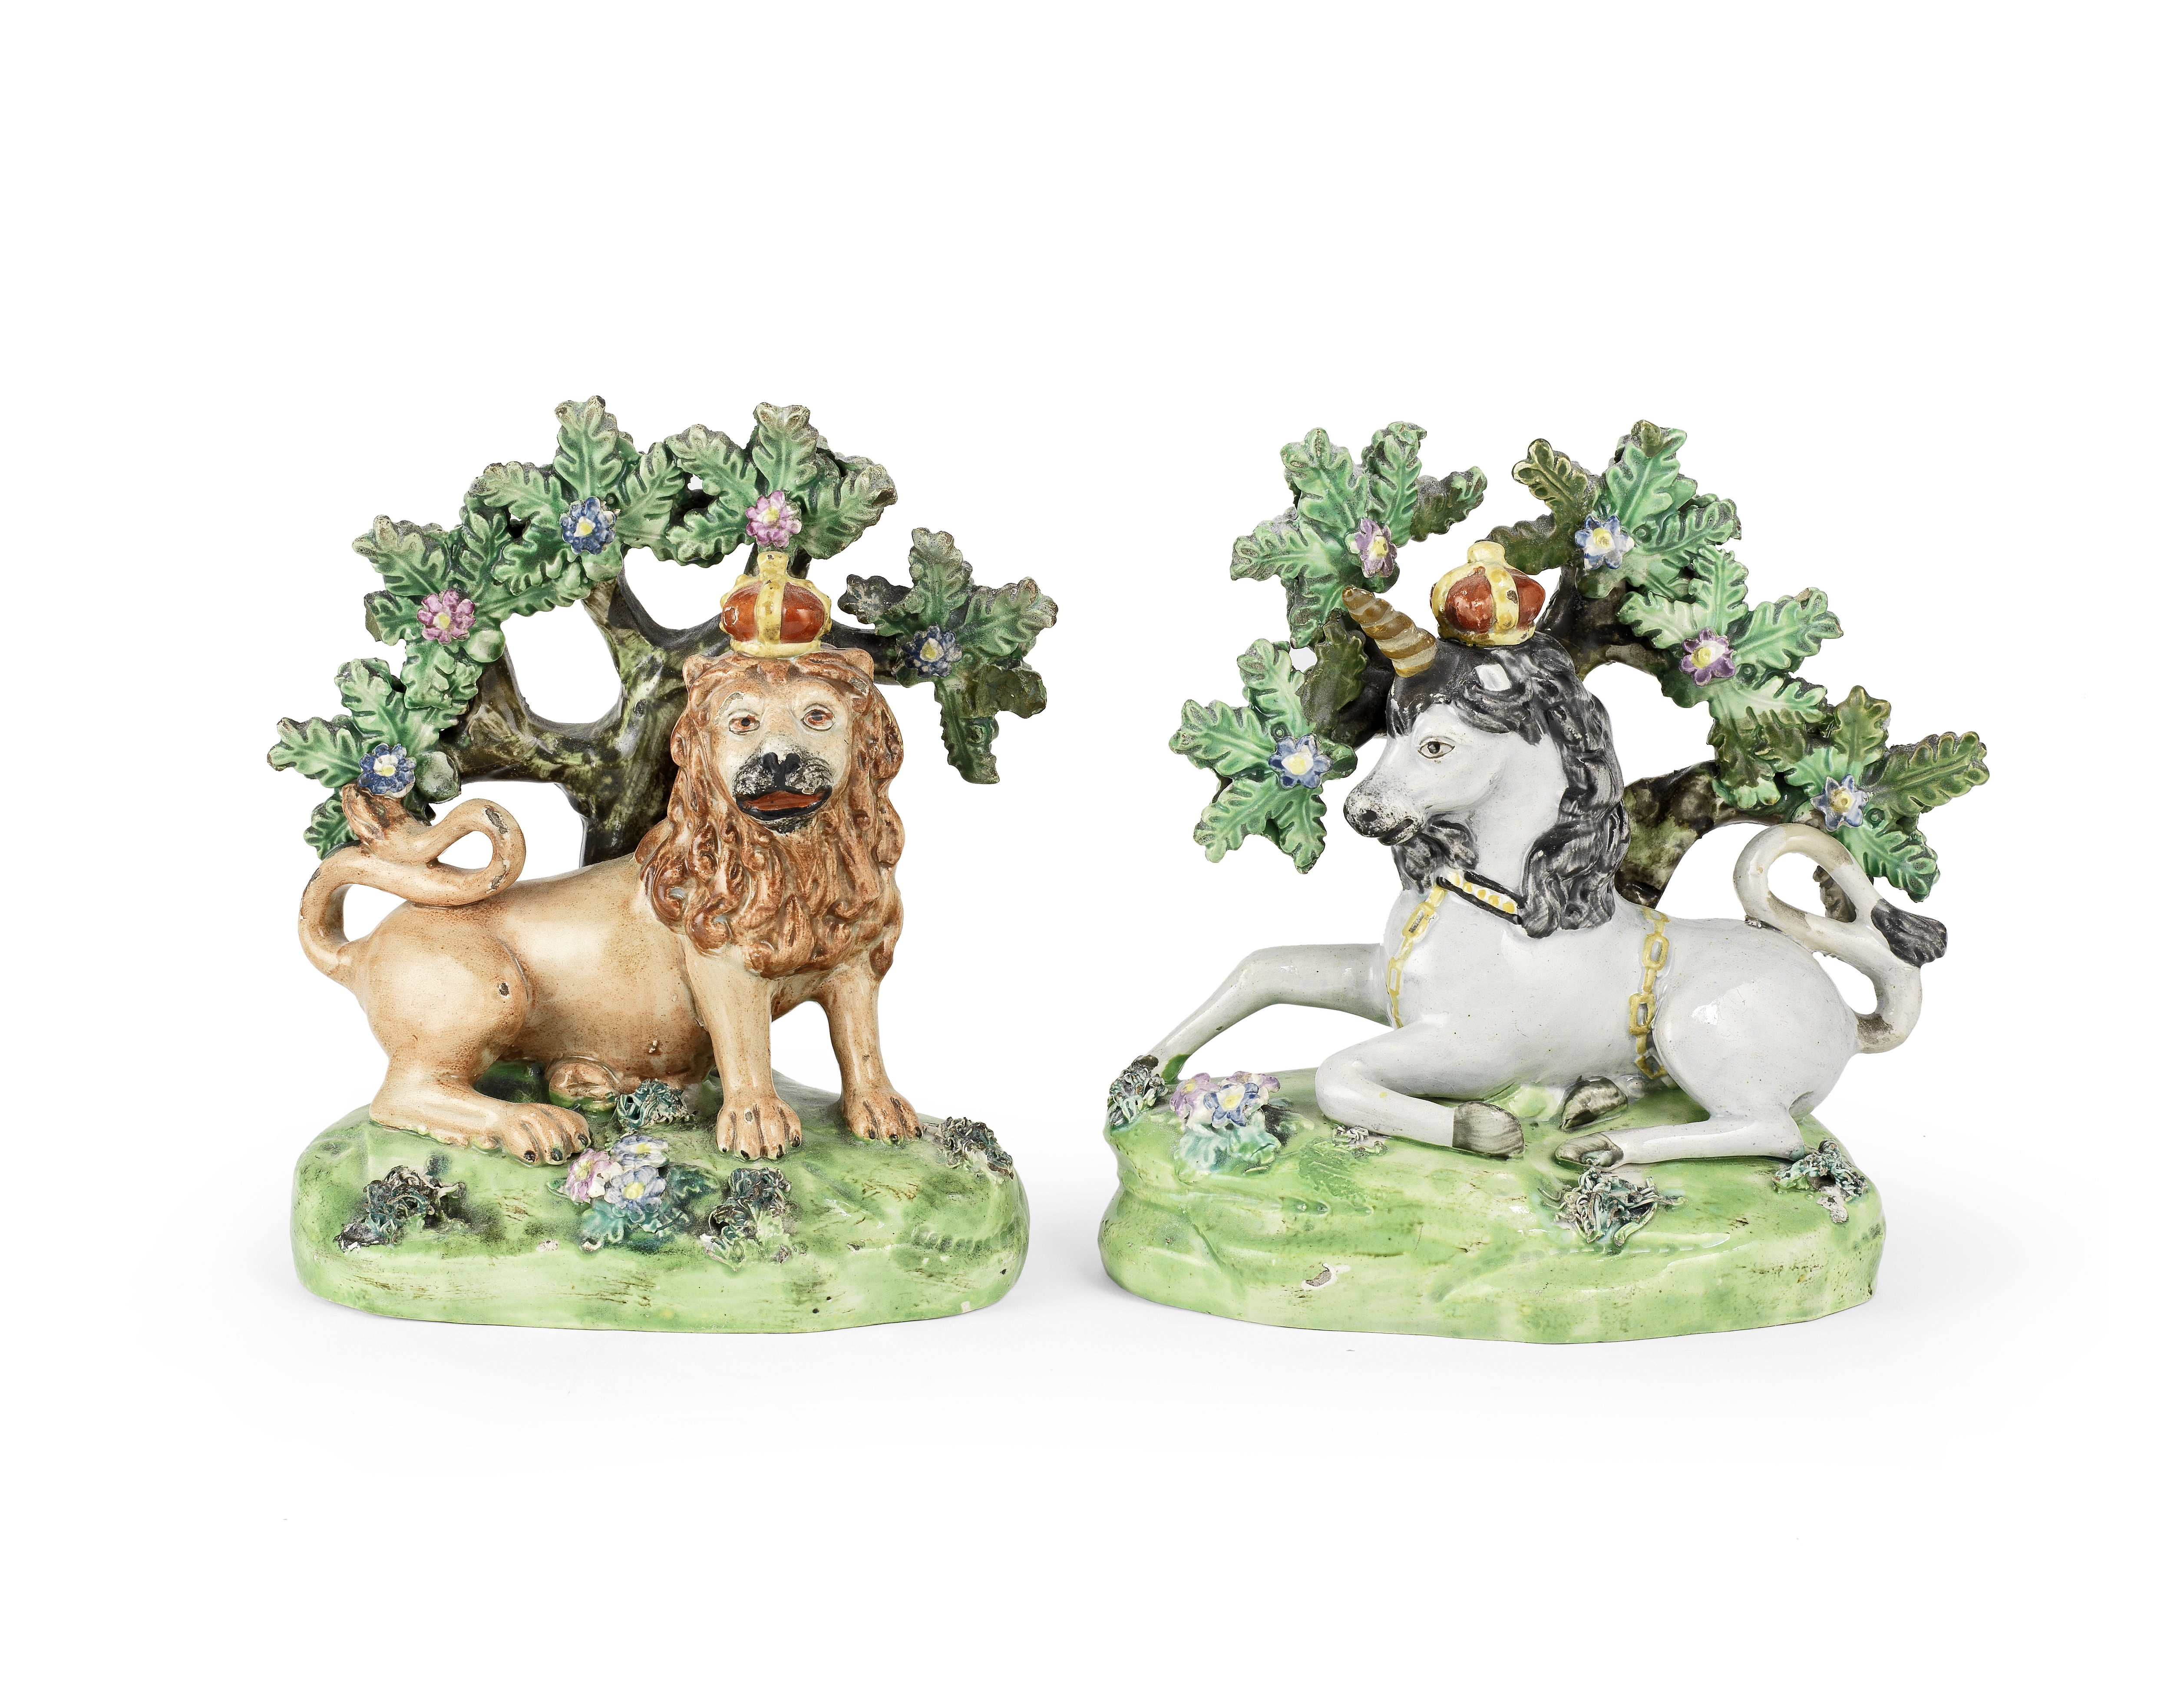 A pair of Staffordshire models of the Royal Arms supporters by John Walton, circa 1820-30